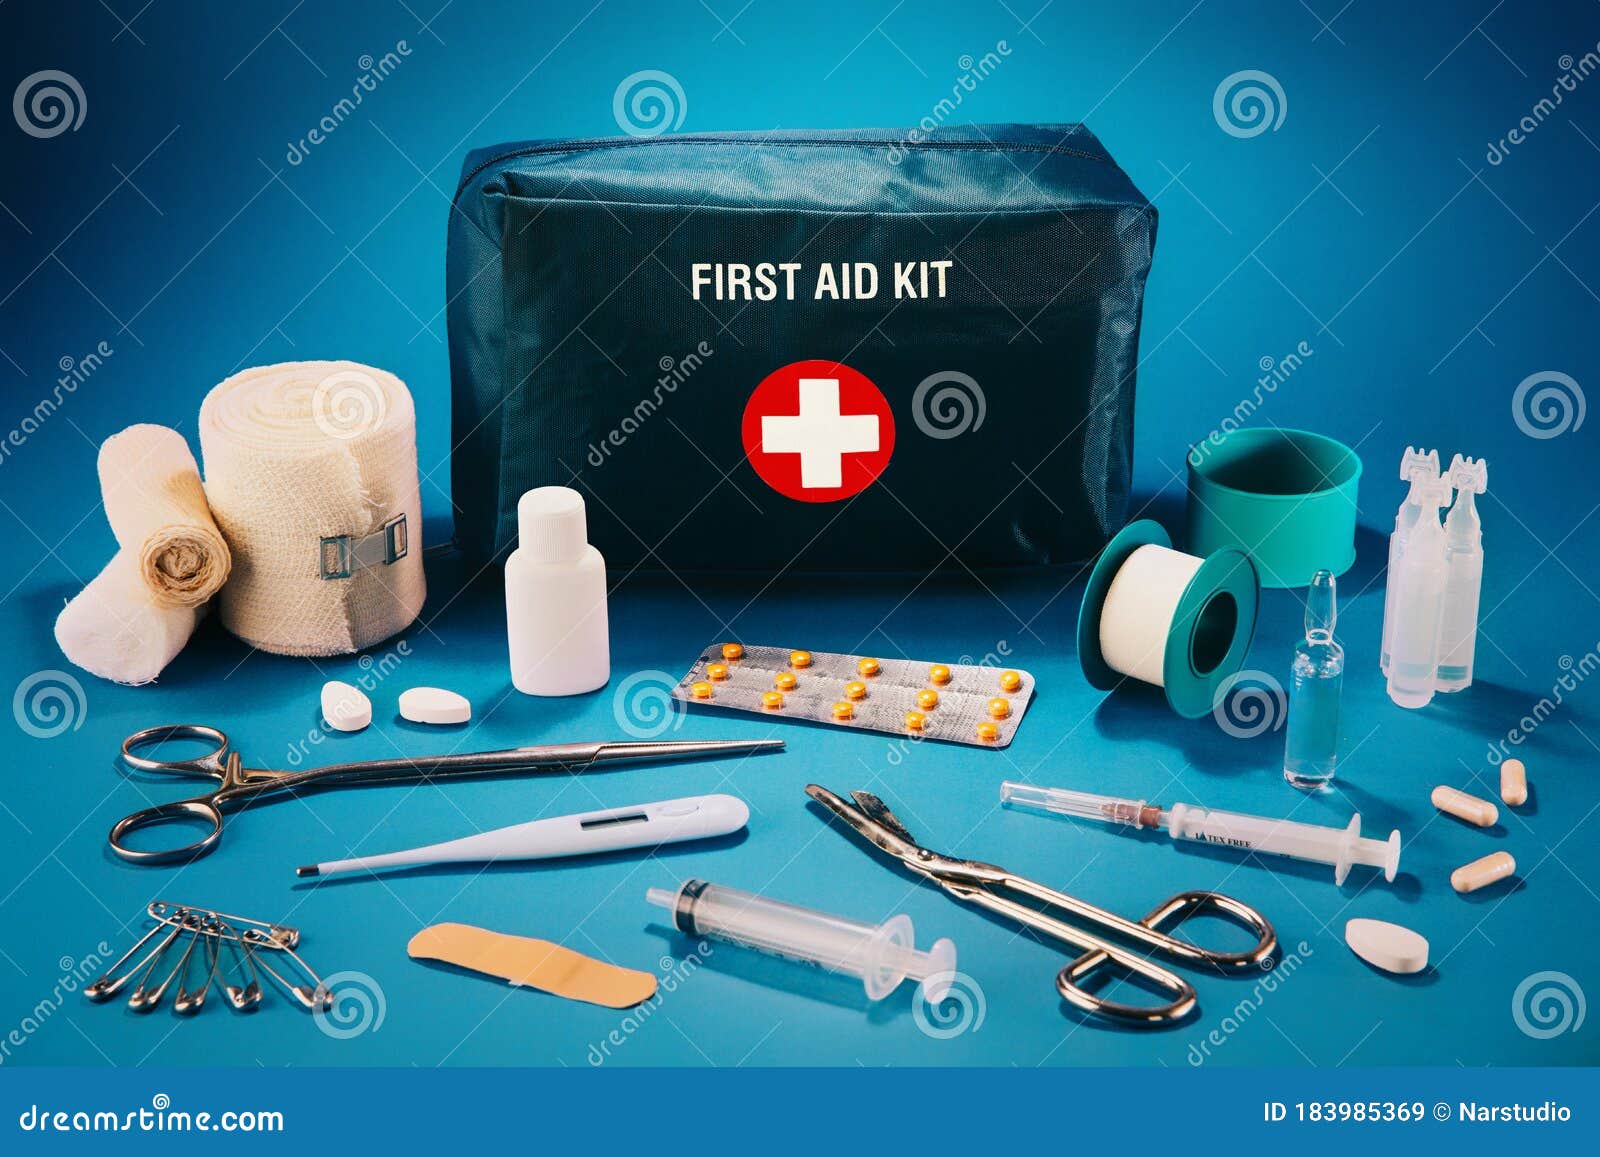 first aid kit content.